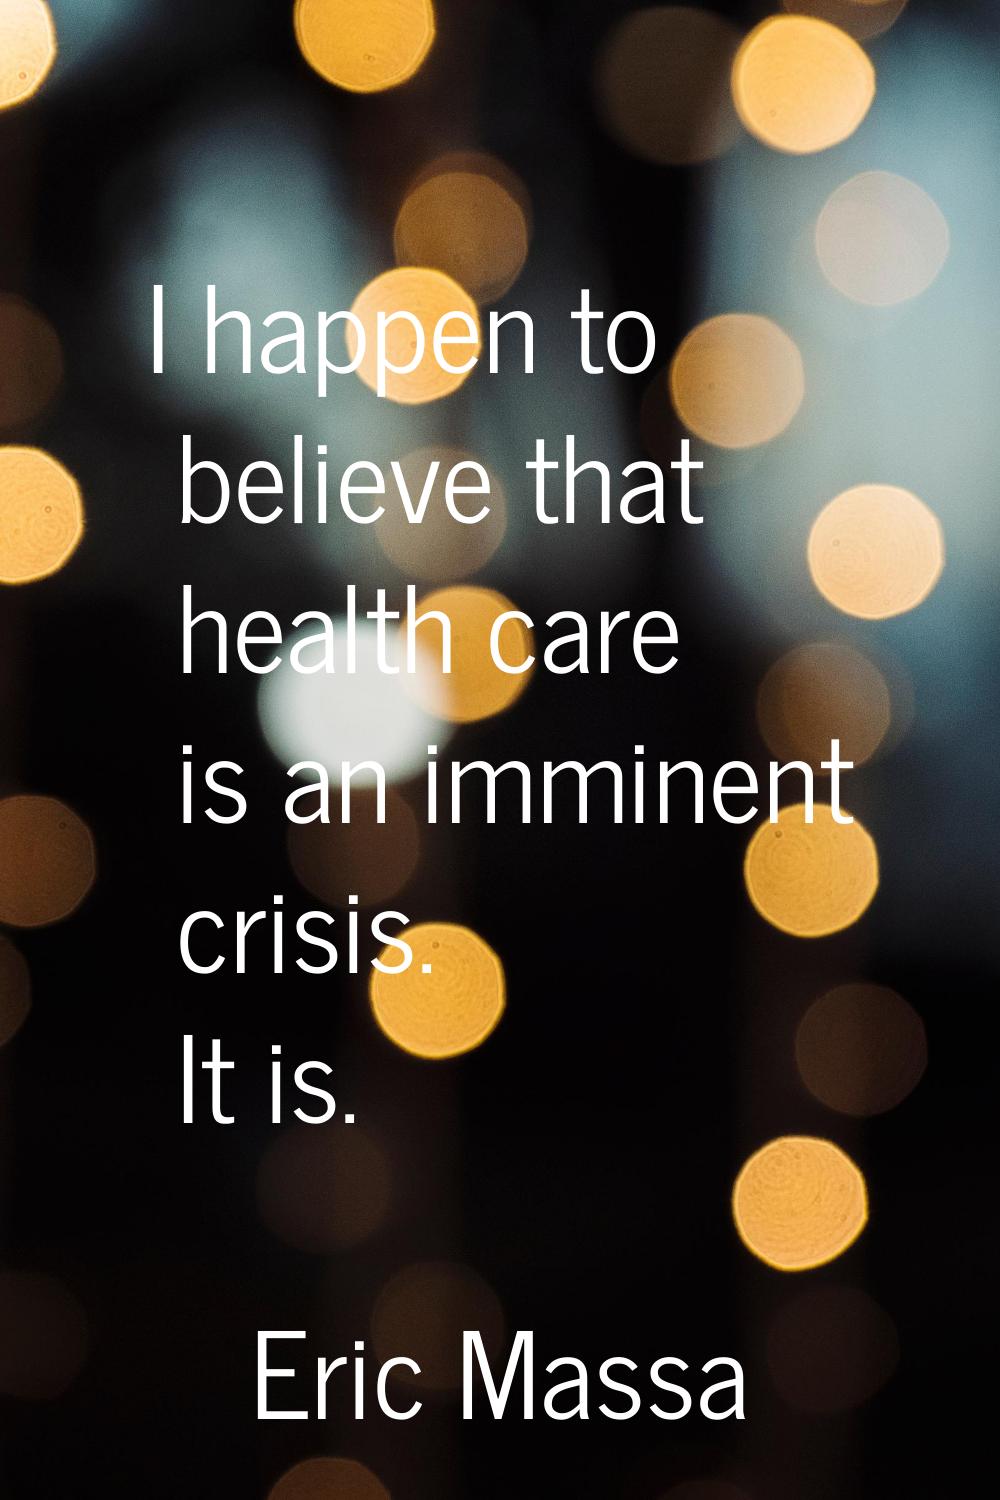 I happen to believe that health care is an imminent crisis. It is.